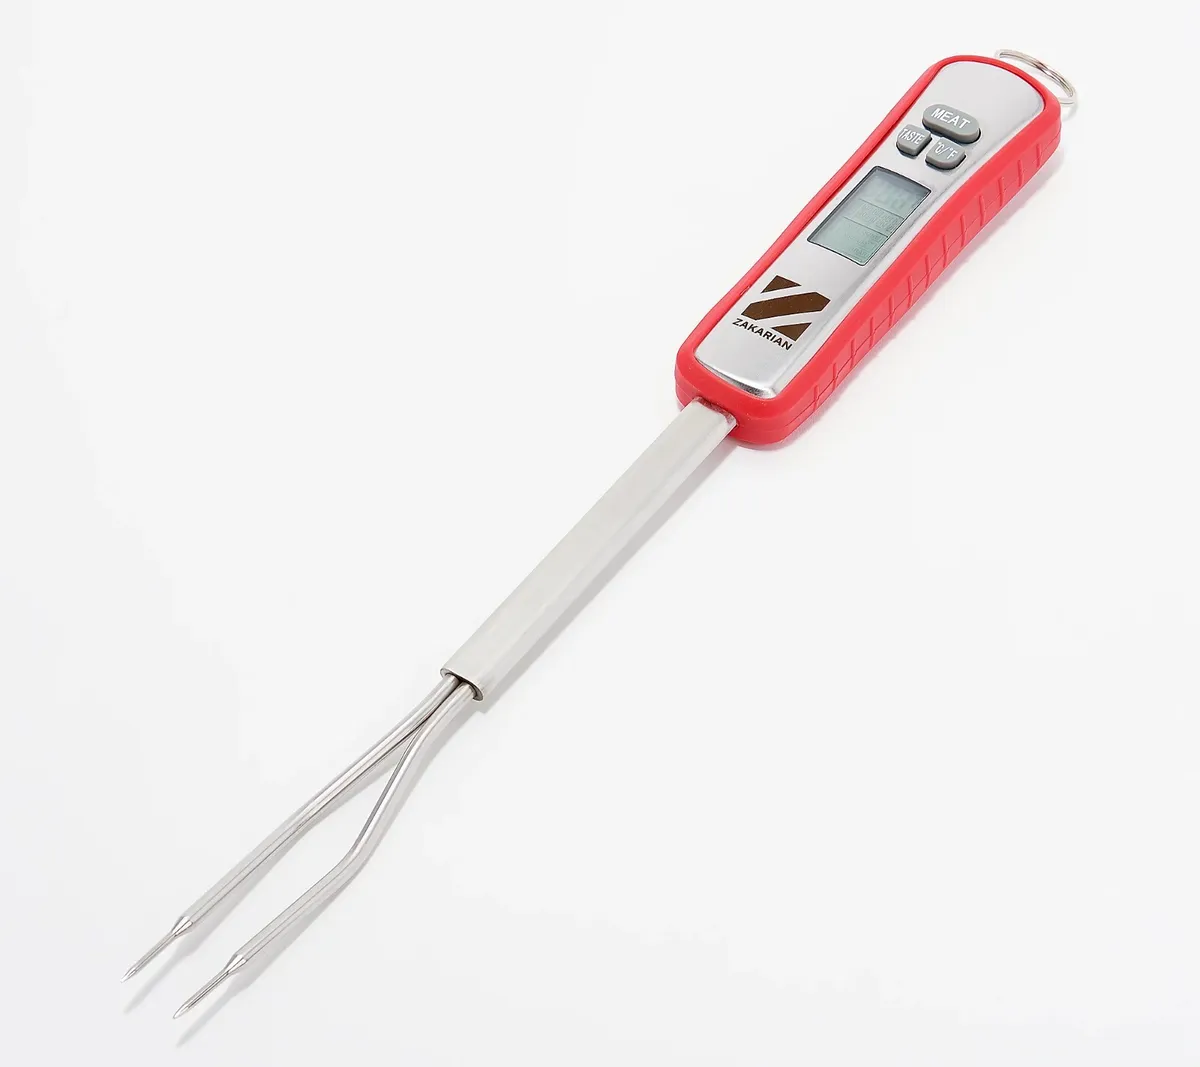 Geoffrey Zakarian Barbecue Digital Fork Thermometer, K62415 - Cranberry  (Red)